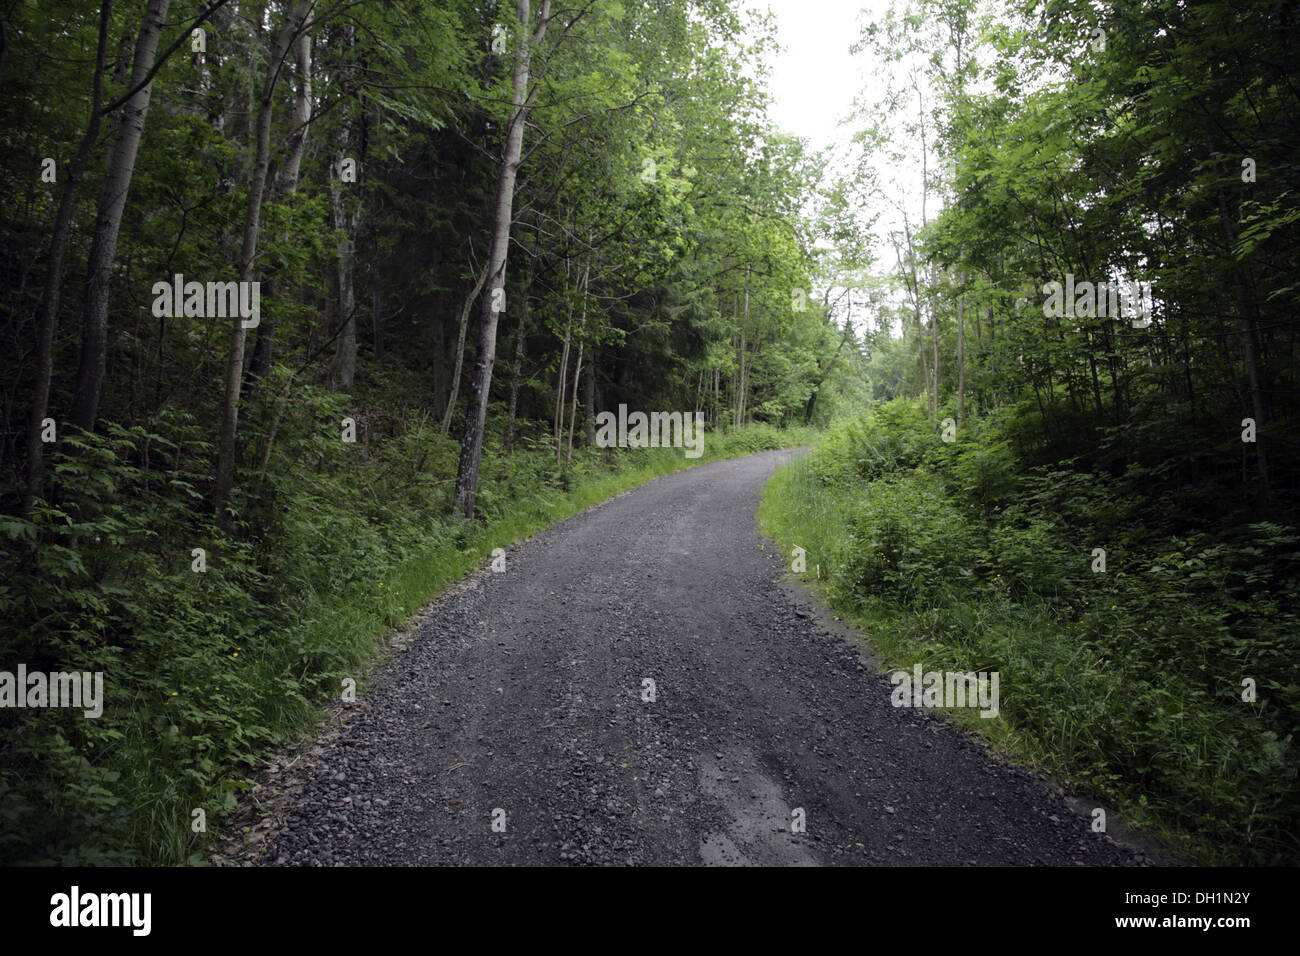 Curved road in Forest Sweden europe Stock Photo